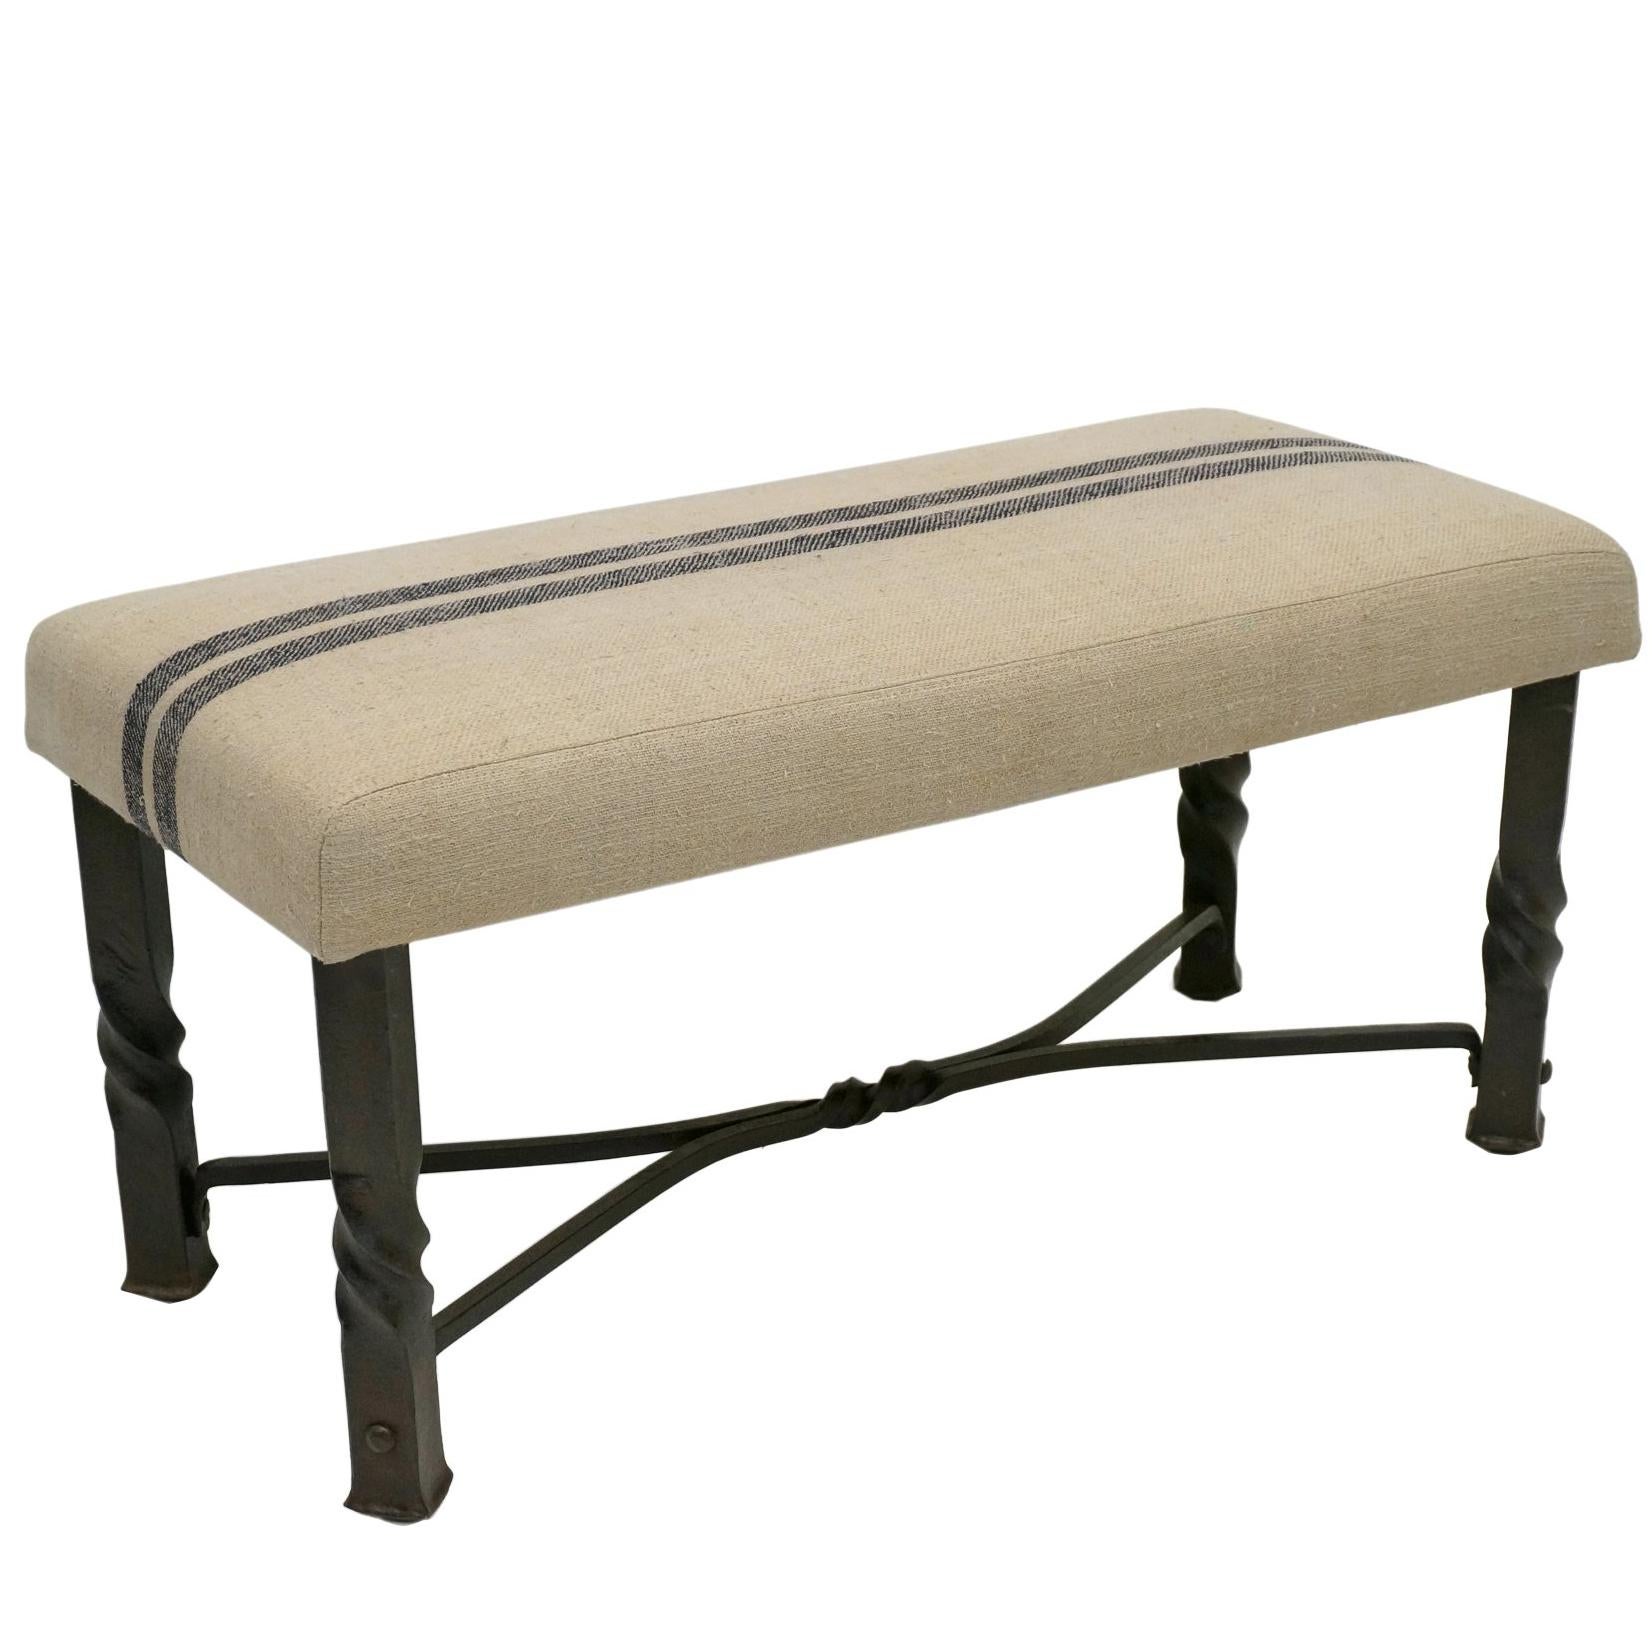 Rectangular Twisted Iron Metal Bench with Upholstered Top, France, circa 1900